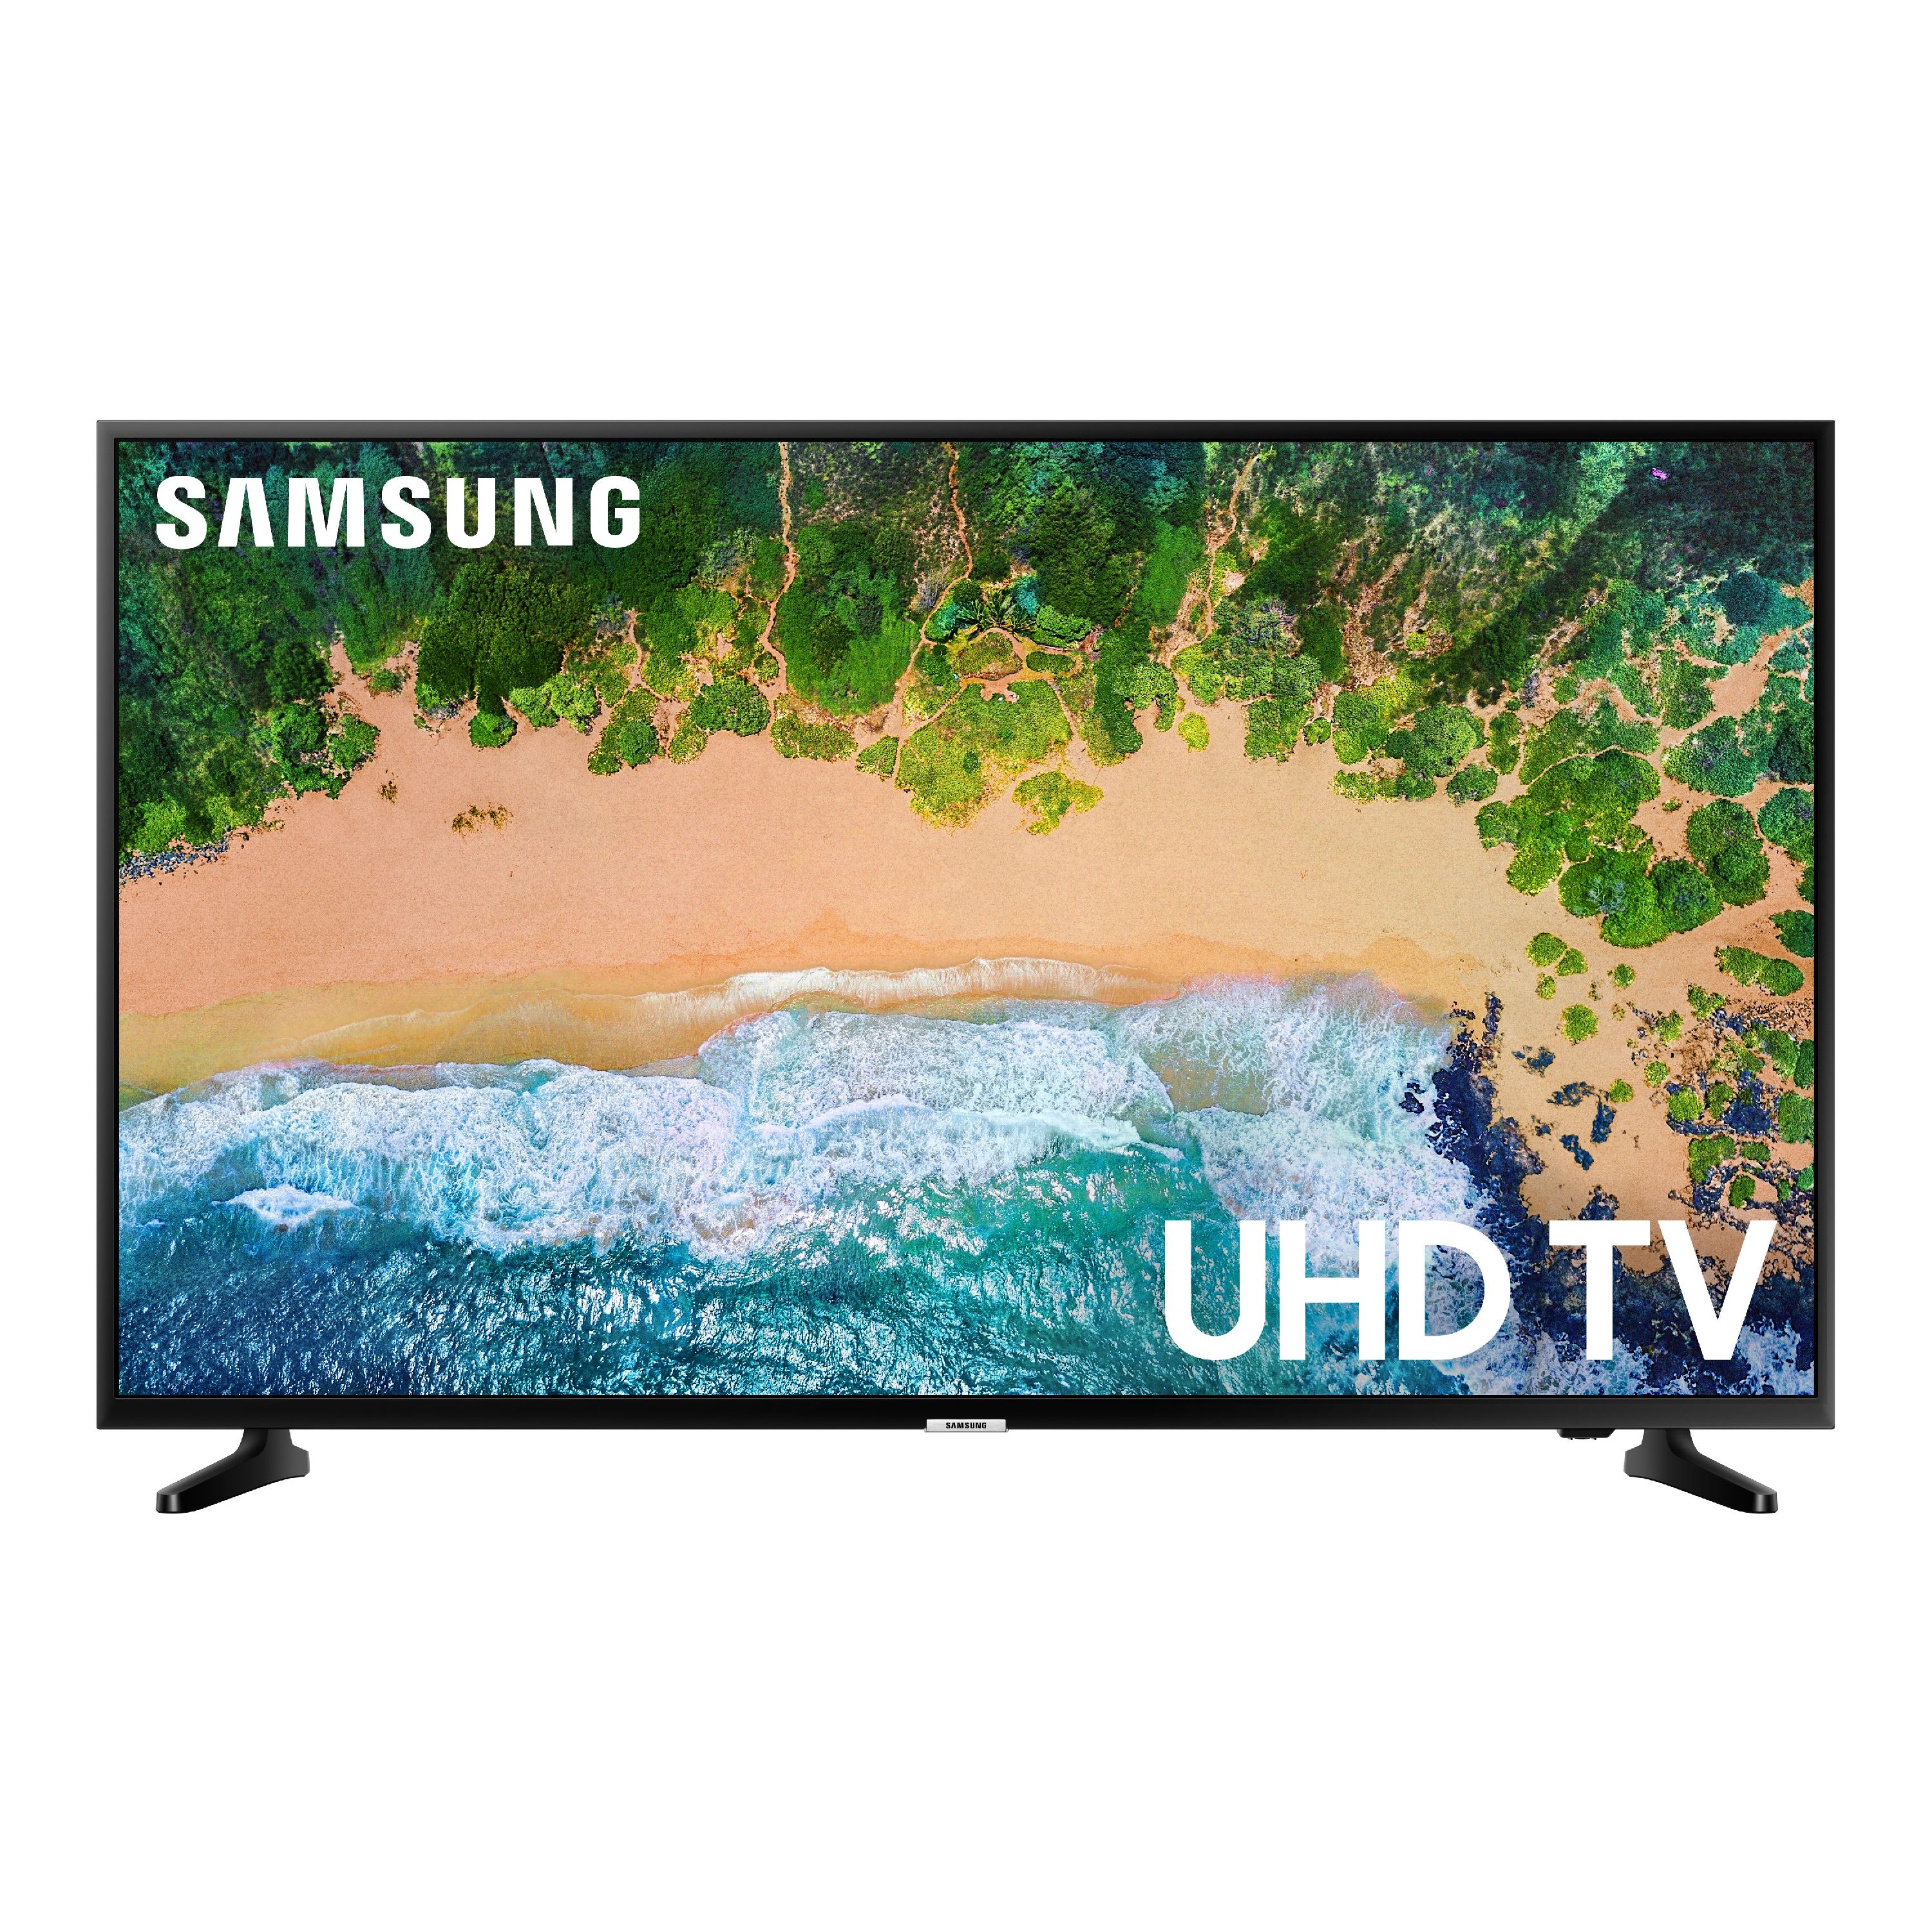 SAMSUNG 50" Class 4K UHD 2160p LED Smart TV with HDR UN50NU6900 - image 1 of 6